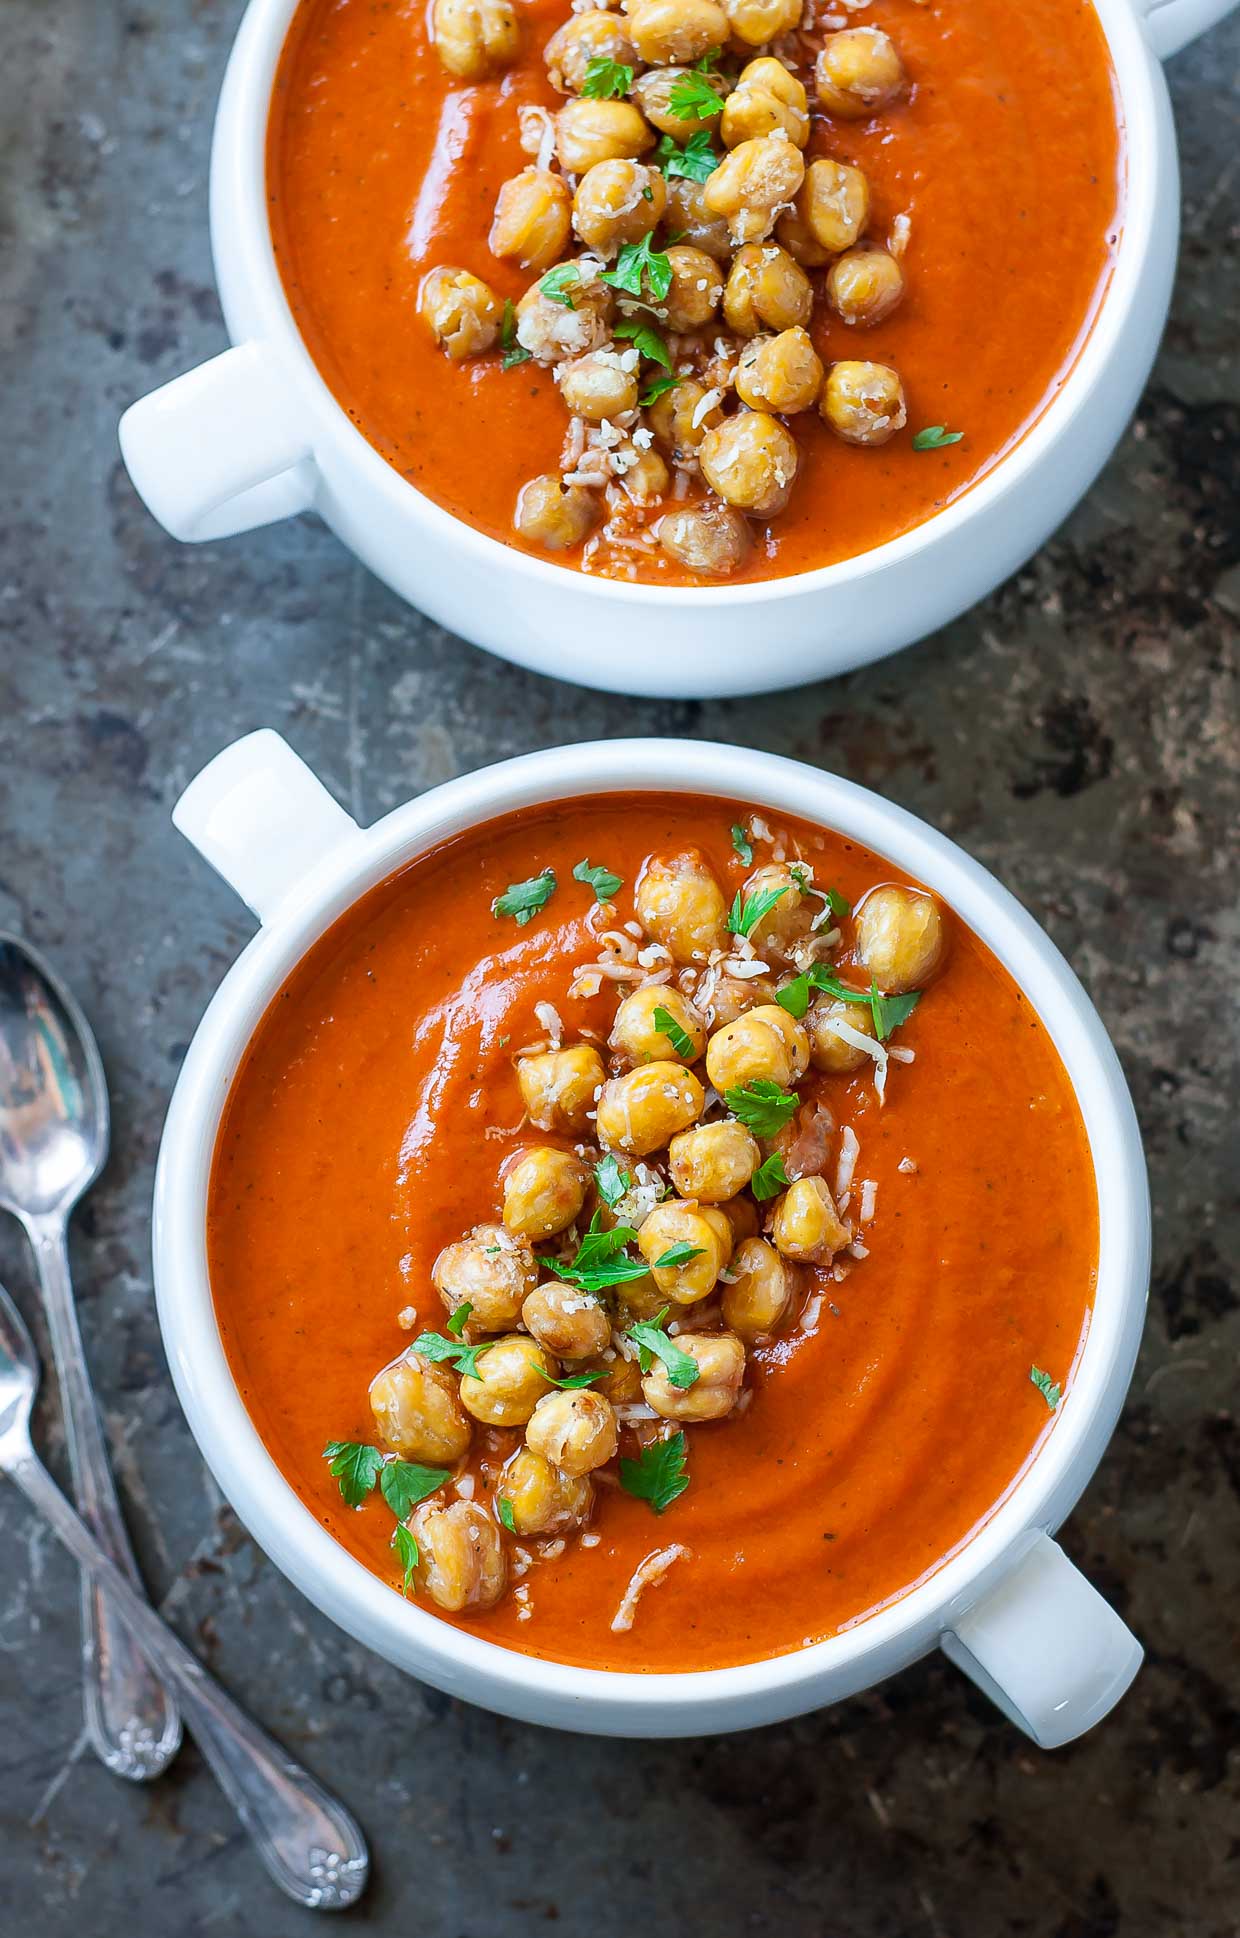 Instant Pot Creamy Tomato Soup with Crispy Parmesan Chickpeas from peasandcrayons.com on foodiecrush.com